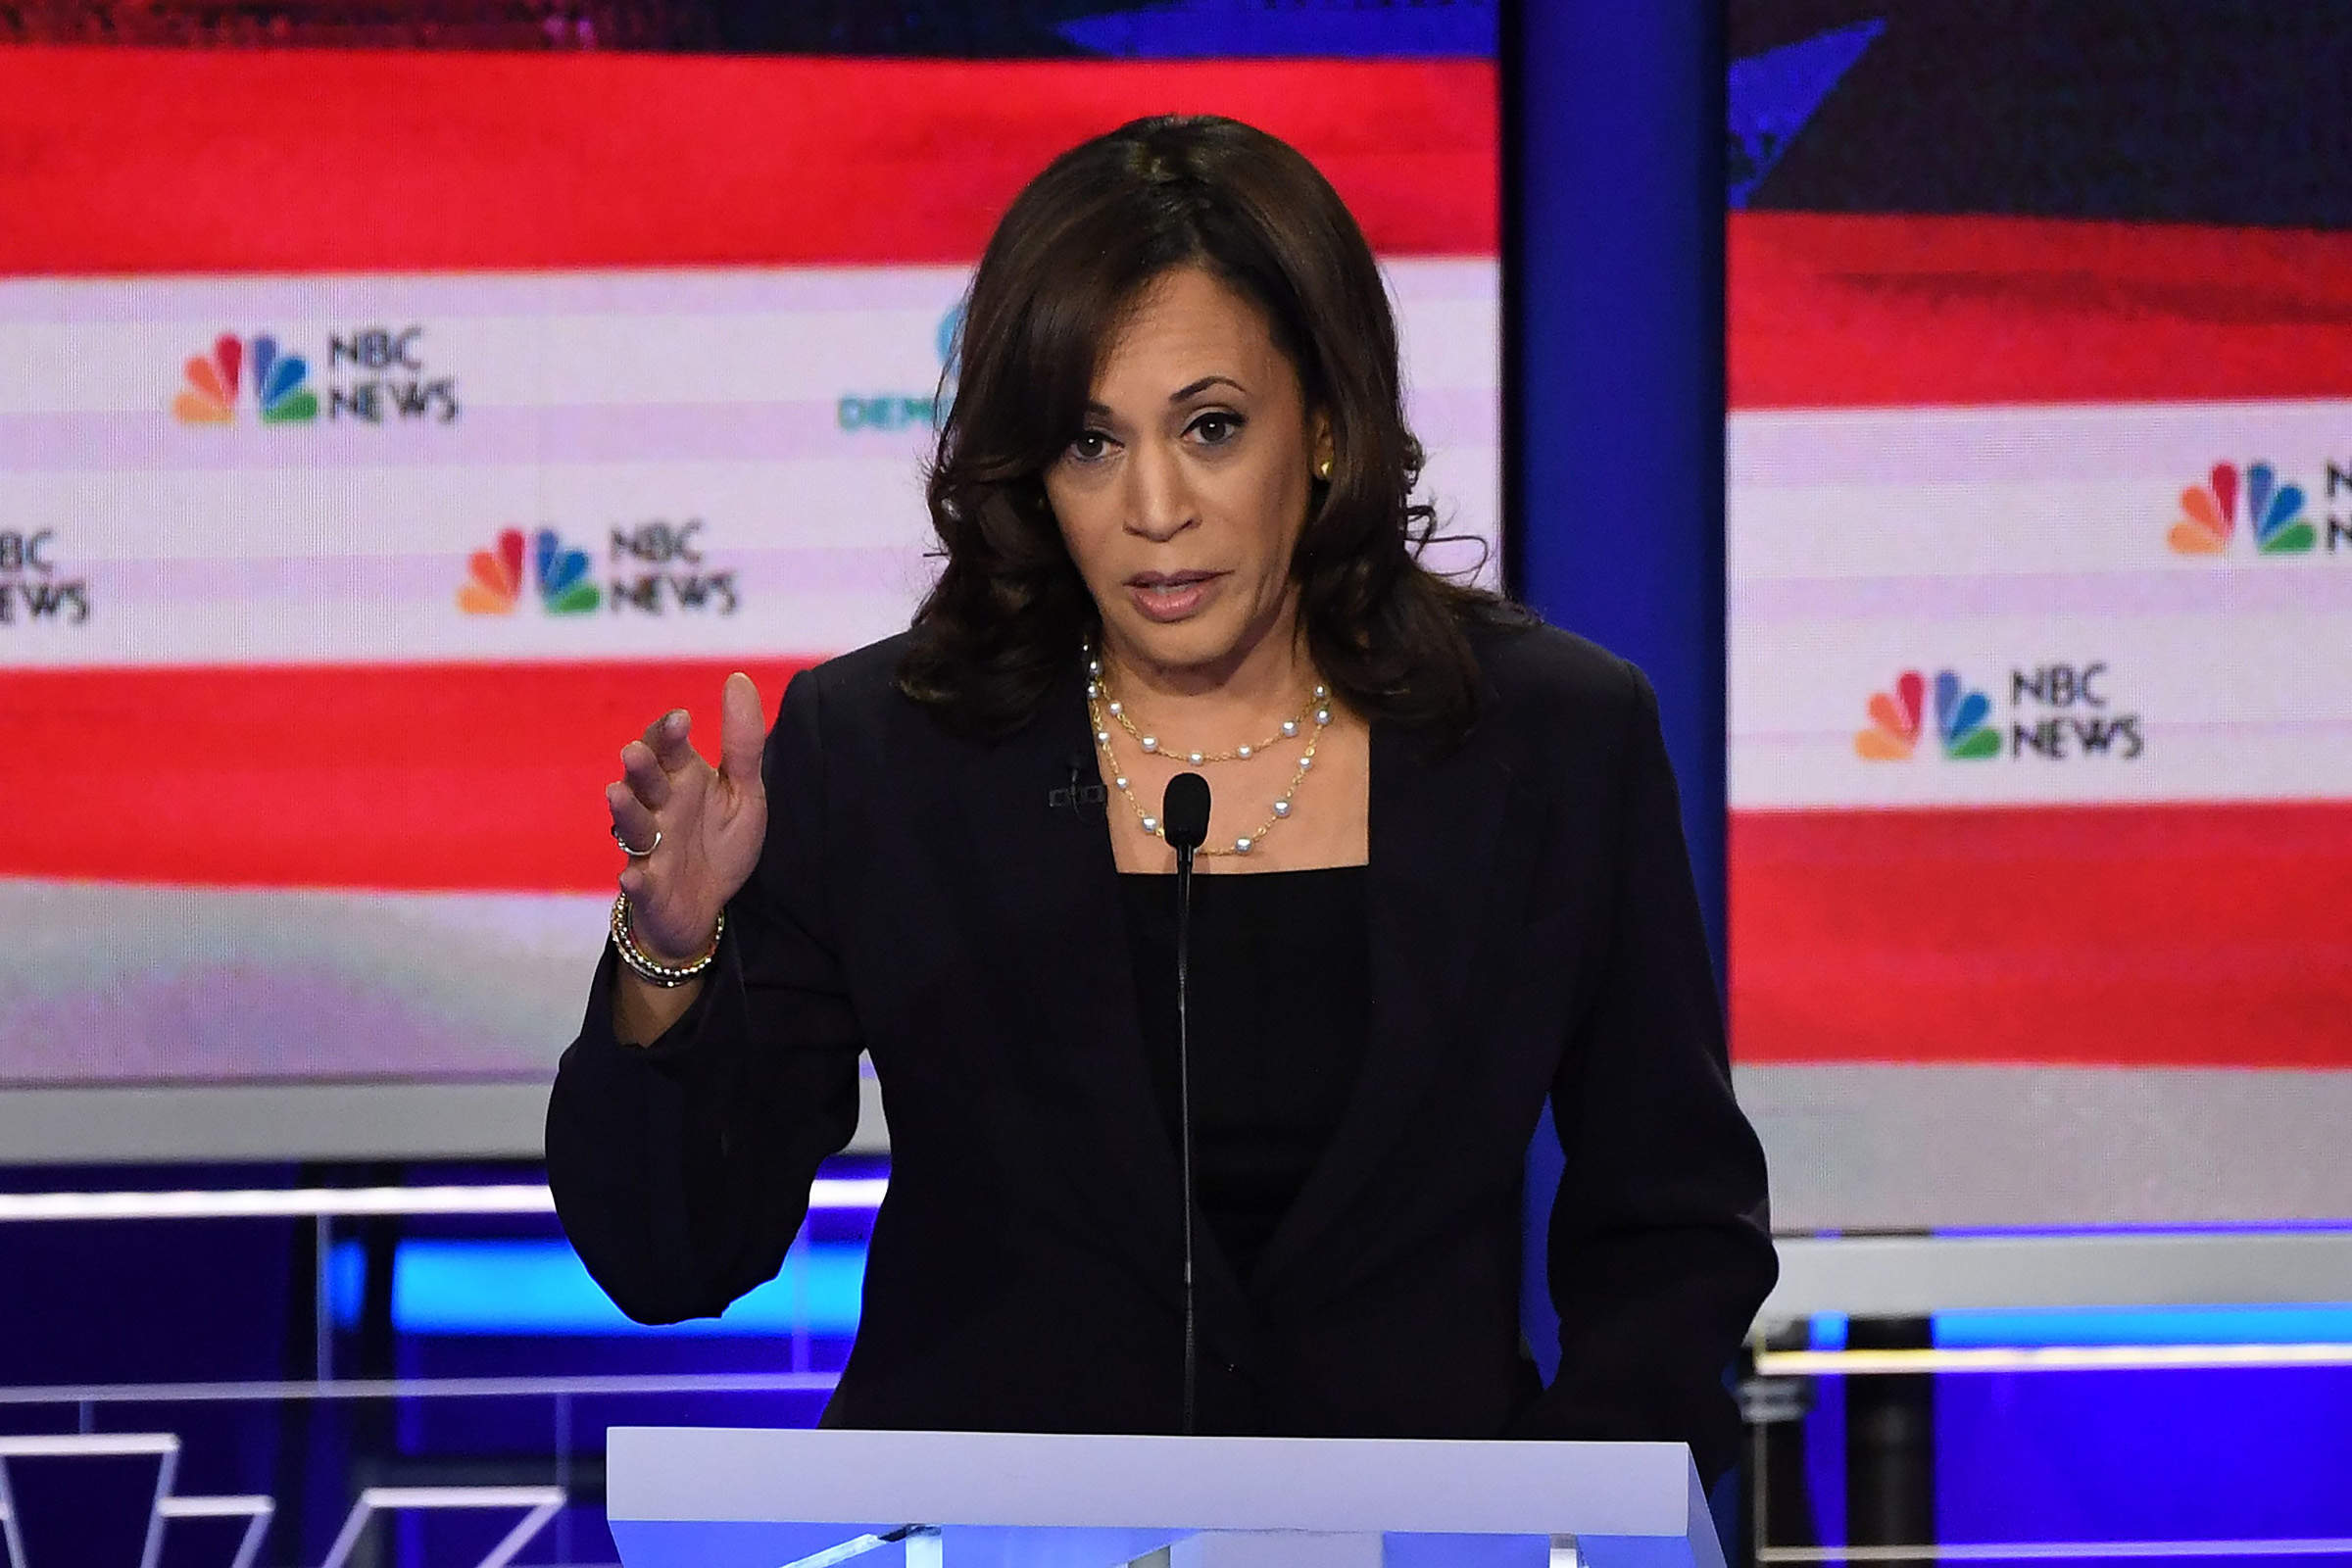 Democratic presidential hopeful US Senator for California Kamala Harris speaks during the second Democratic primary debate of the 2020 presidential campaign season hosted by NBC News at the Adrienne Arsht Center for the Performing Arts in Miami, Florida, June 27, 2019. (Saul Loeb—AFP/Getty Images)